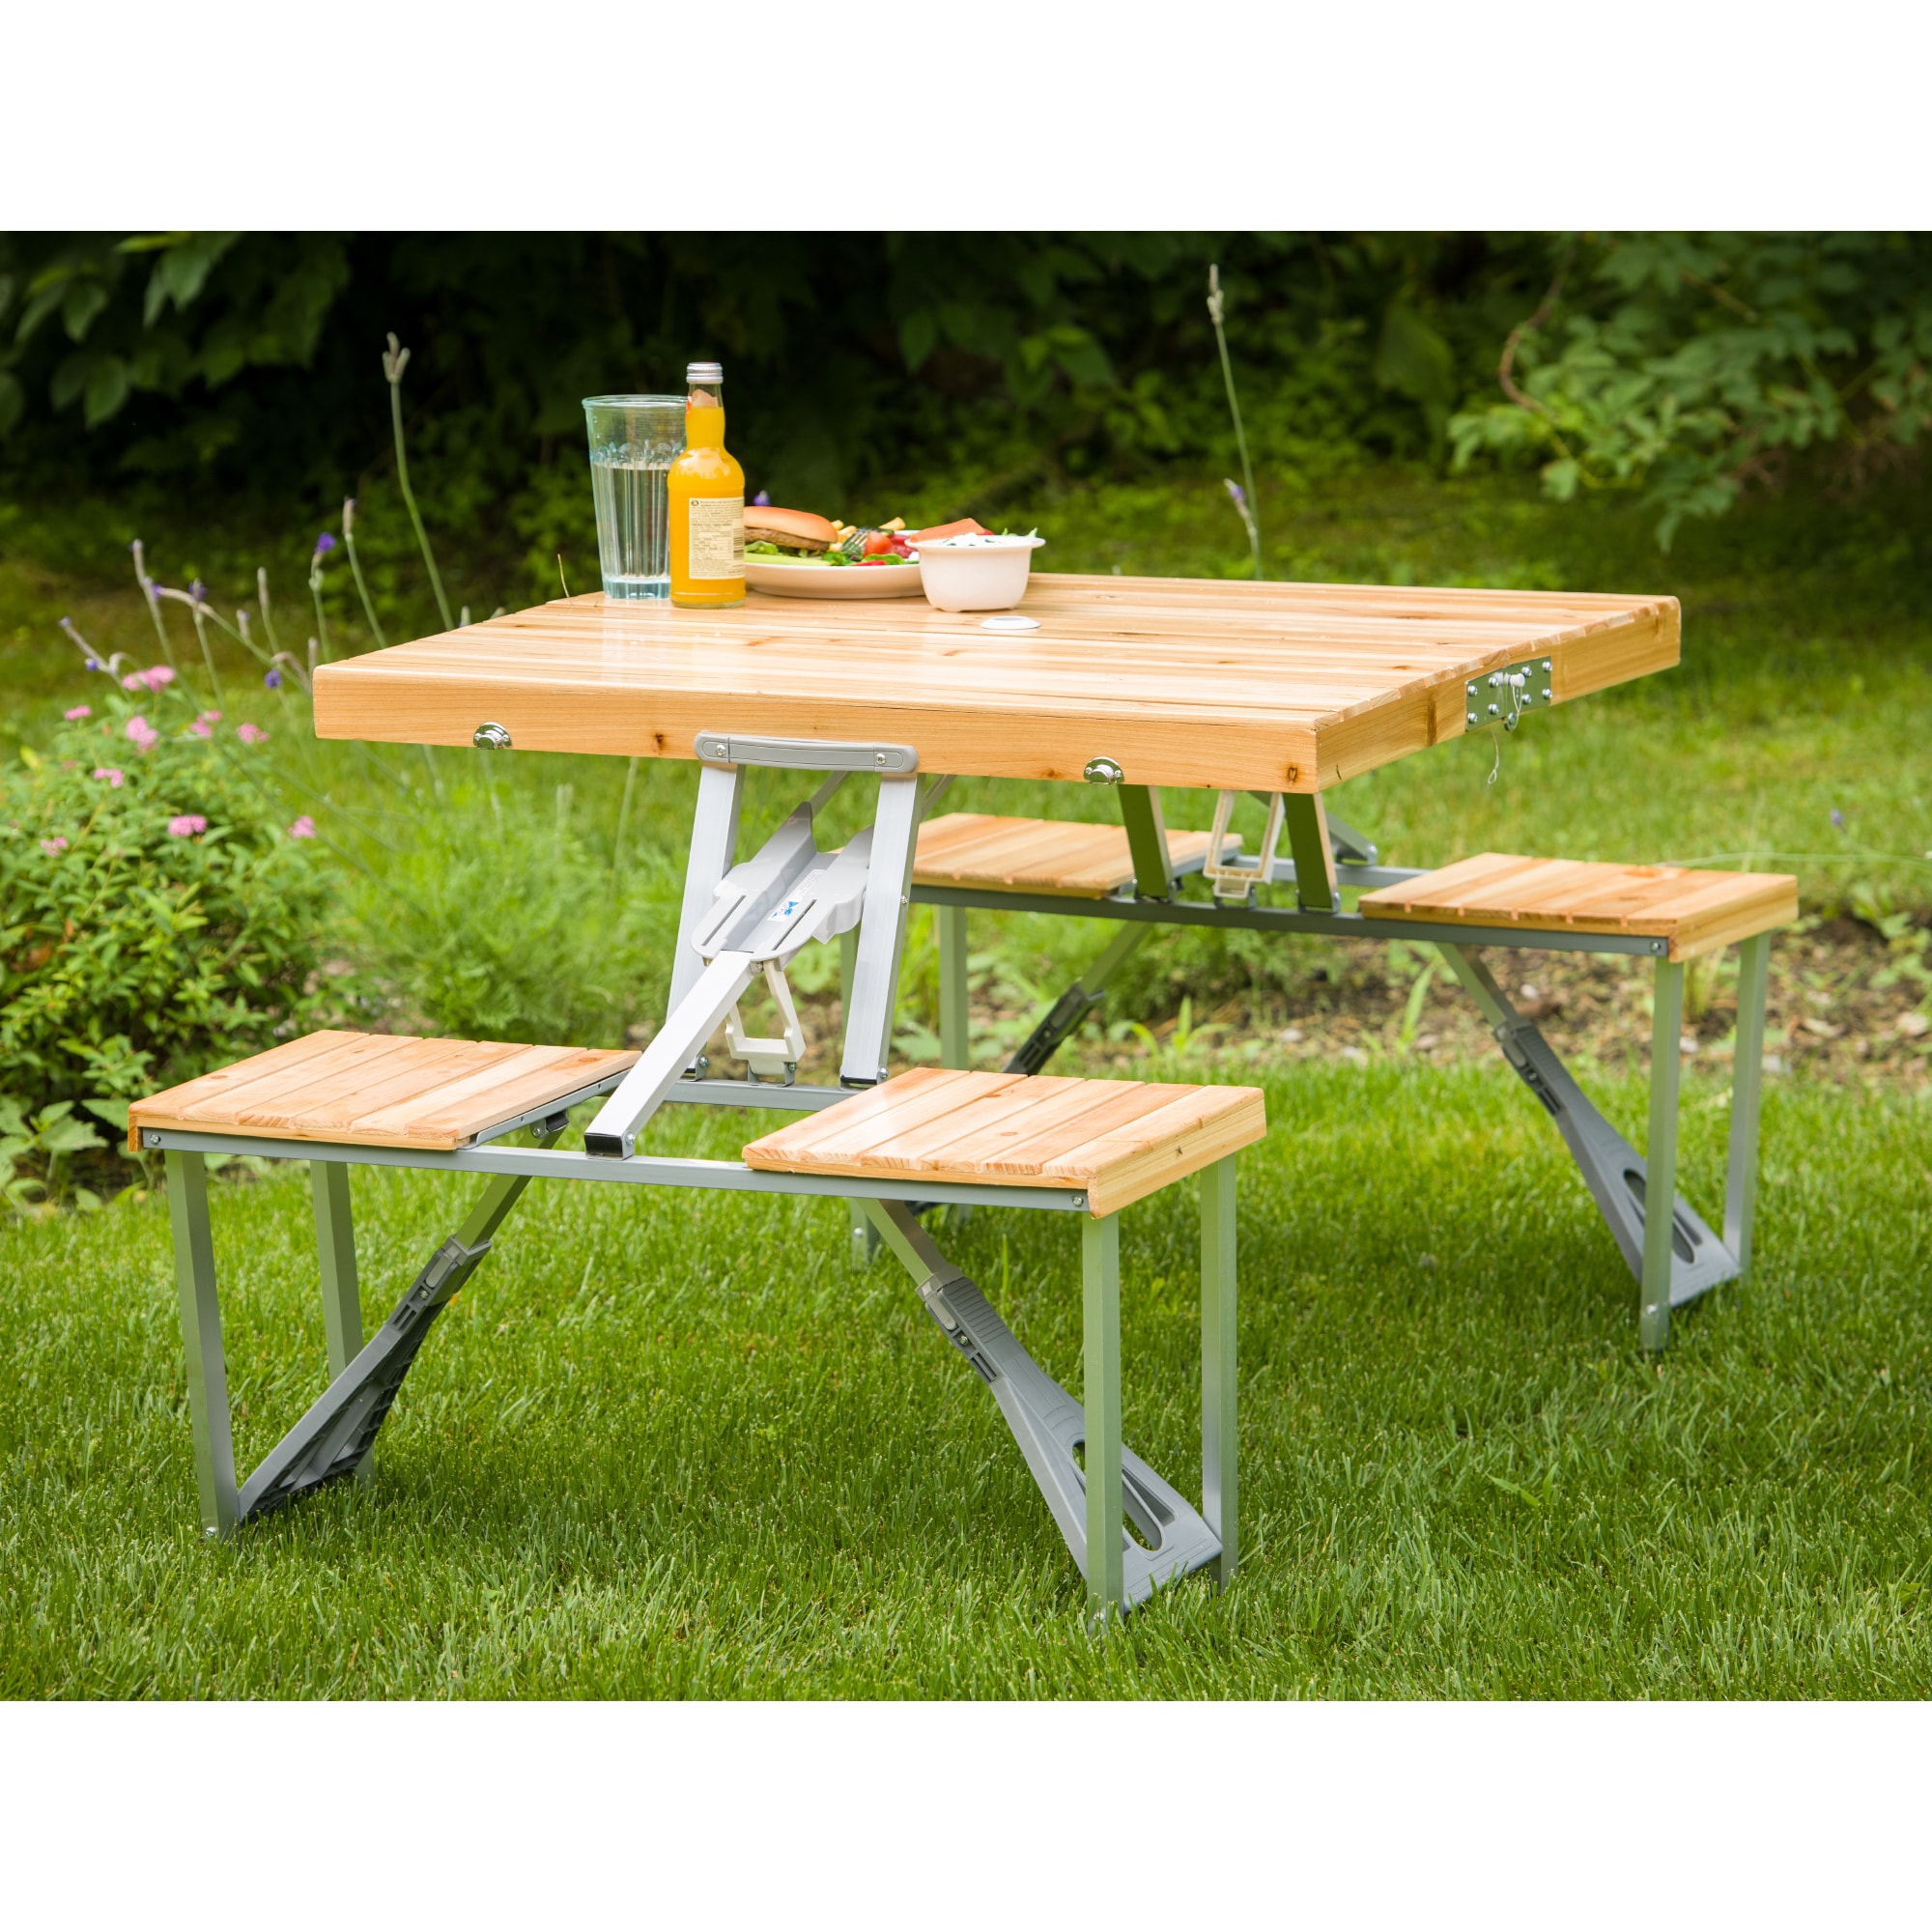 Outsunny Portable Folding Trestle Camping Picnic Table Outdoor Chair Stools 